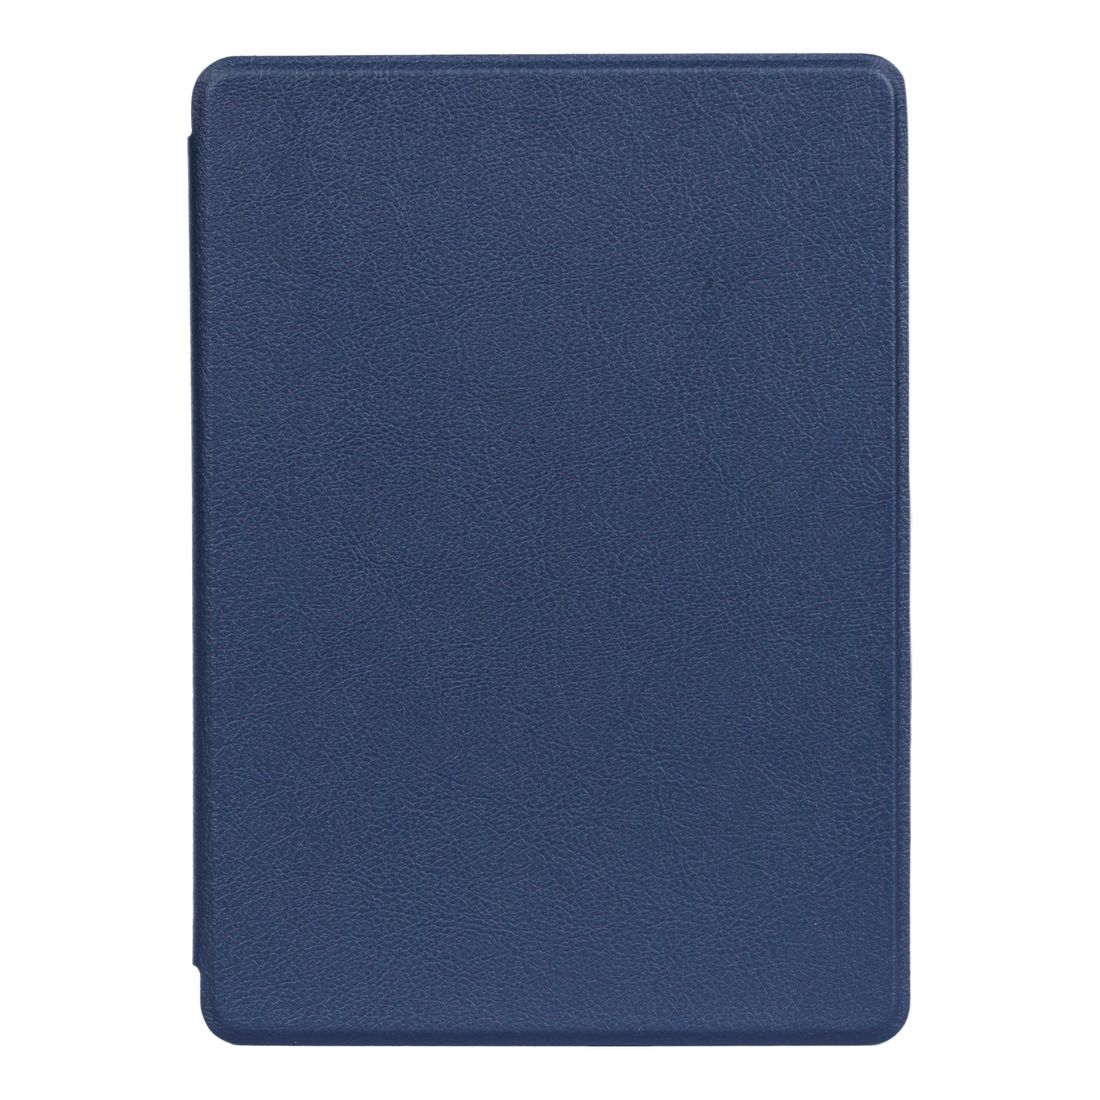 DOT Case for Amazon All New Kindle (11th Gen) - Blue